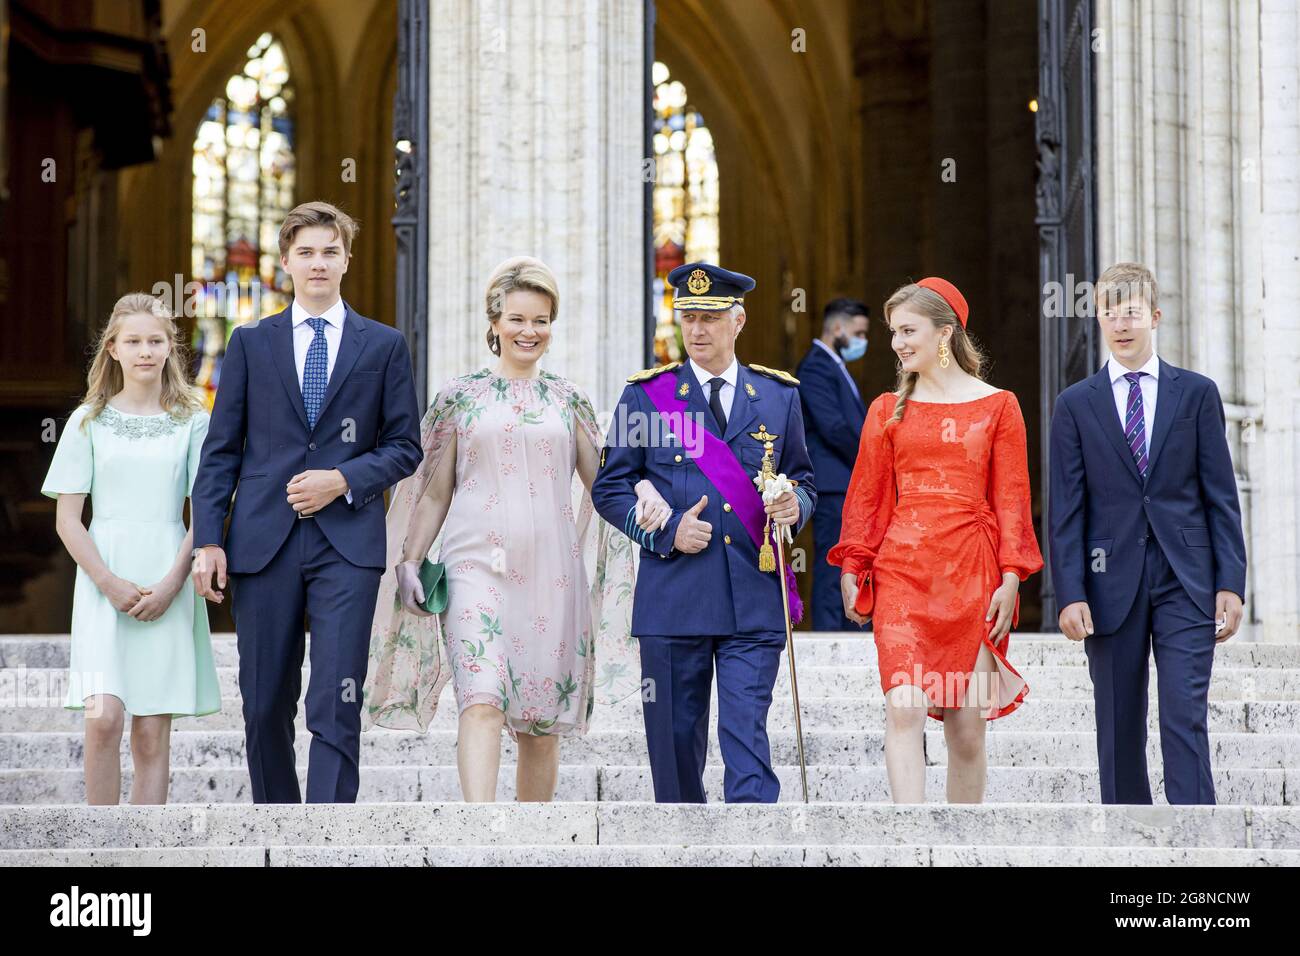 King Philippe of Belgium, Queen Mathilde of Belgium, Princess Elisabeth of Belgium, Prince Gabriel of Belgium, Prince Emmanuel of Belgium and Princess Eleonore of Belgium attend the Te Deum Mass at the National day in the Cathedral on July 21, 2021 in Brussels, Belgium. robin utrecht Photo by Robin Utrecht/ABACAPRESS.COM Stock Photo